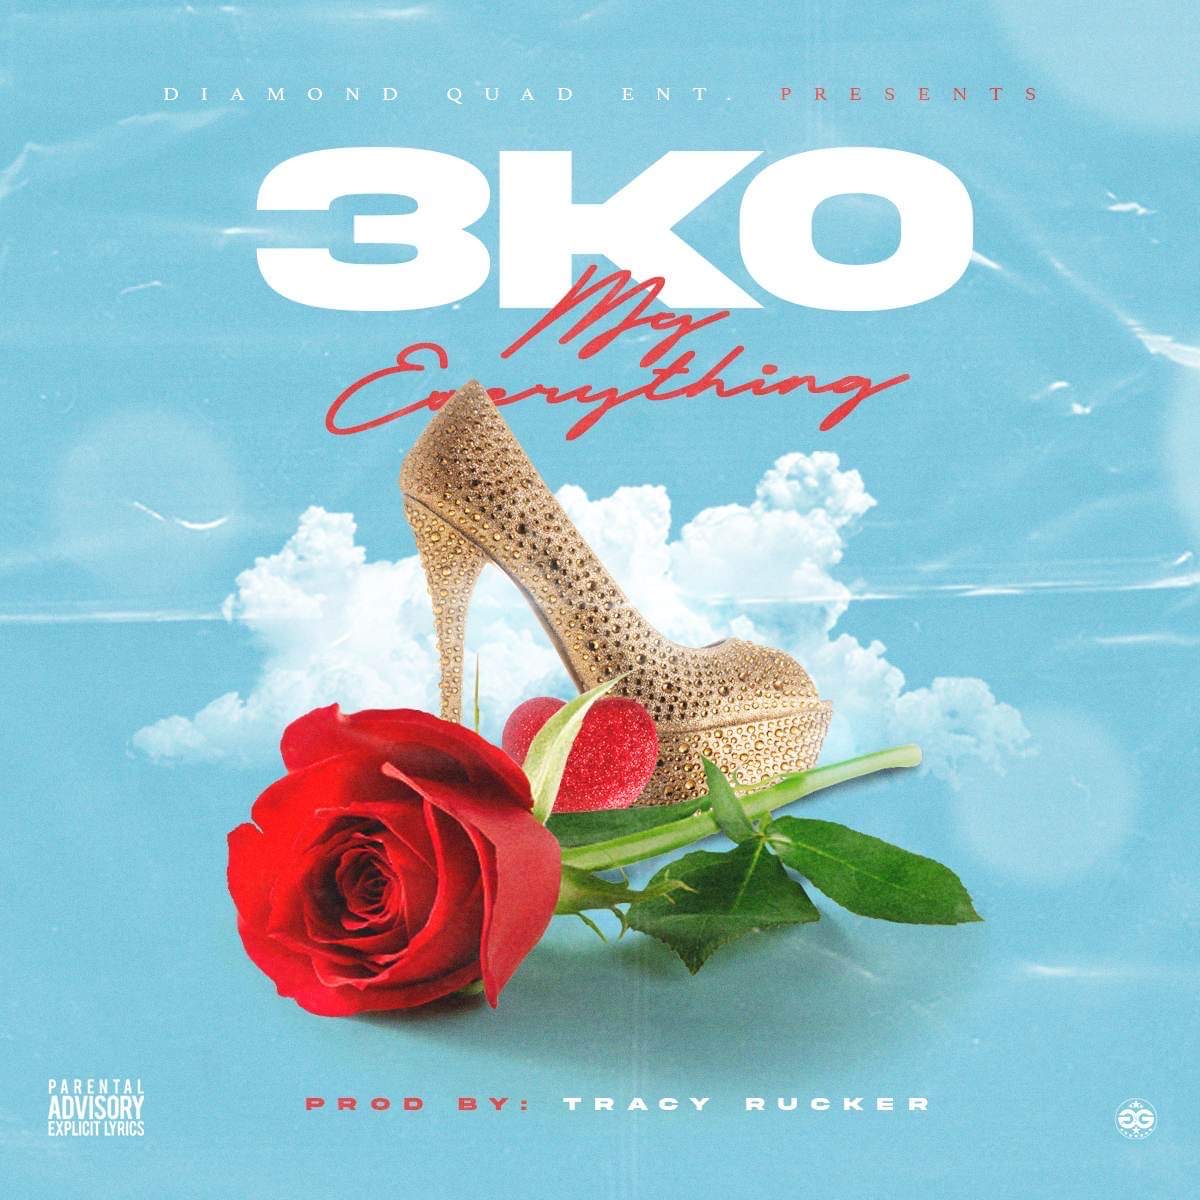 Telling his story his own way, 3KO to release new single ‘My Everything’.